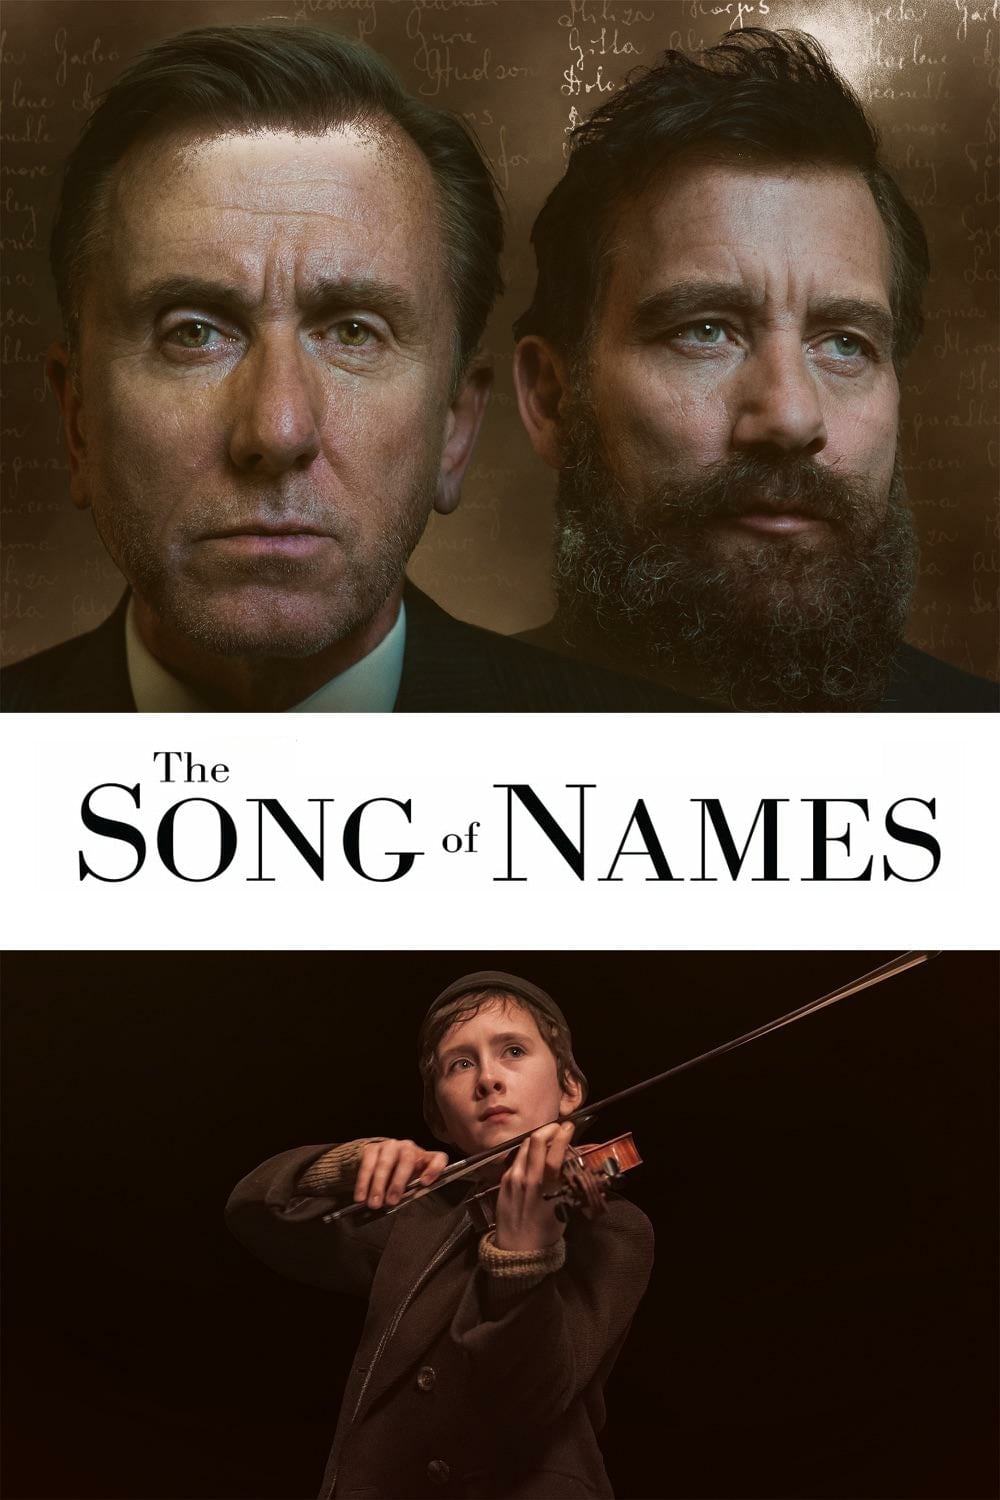 Poster for the movie "The Song of Names"